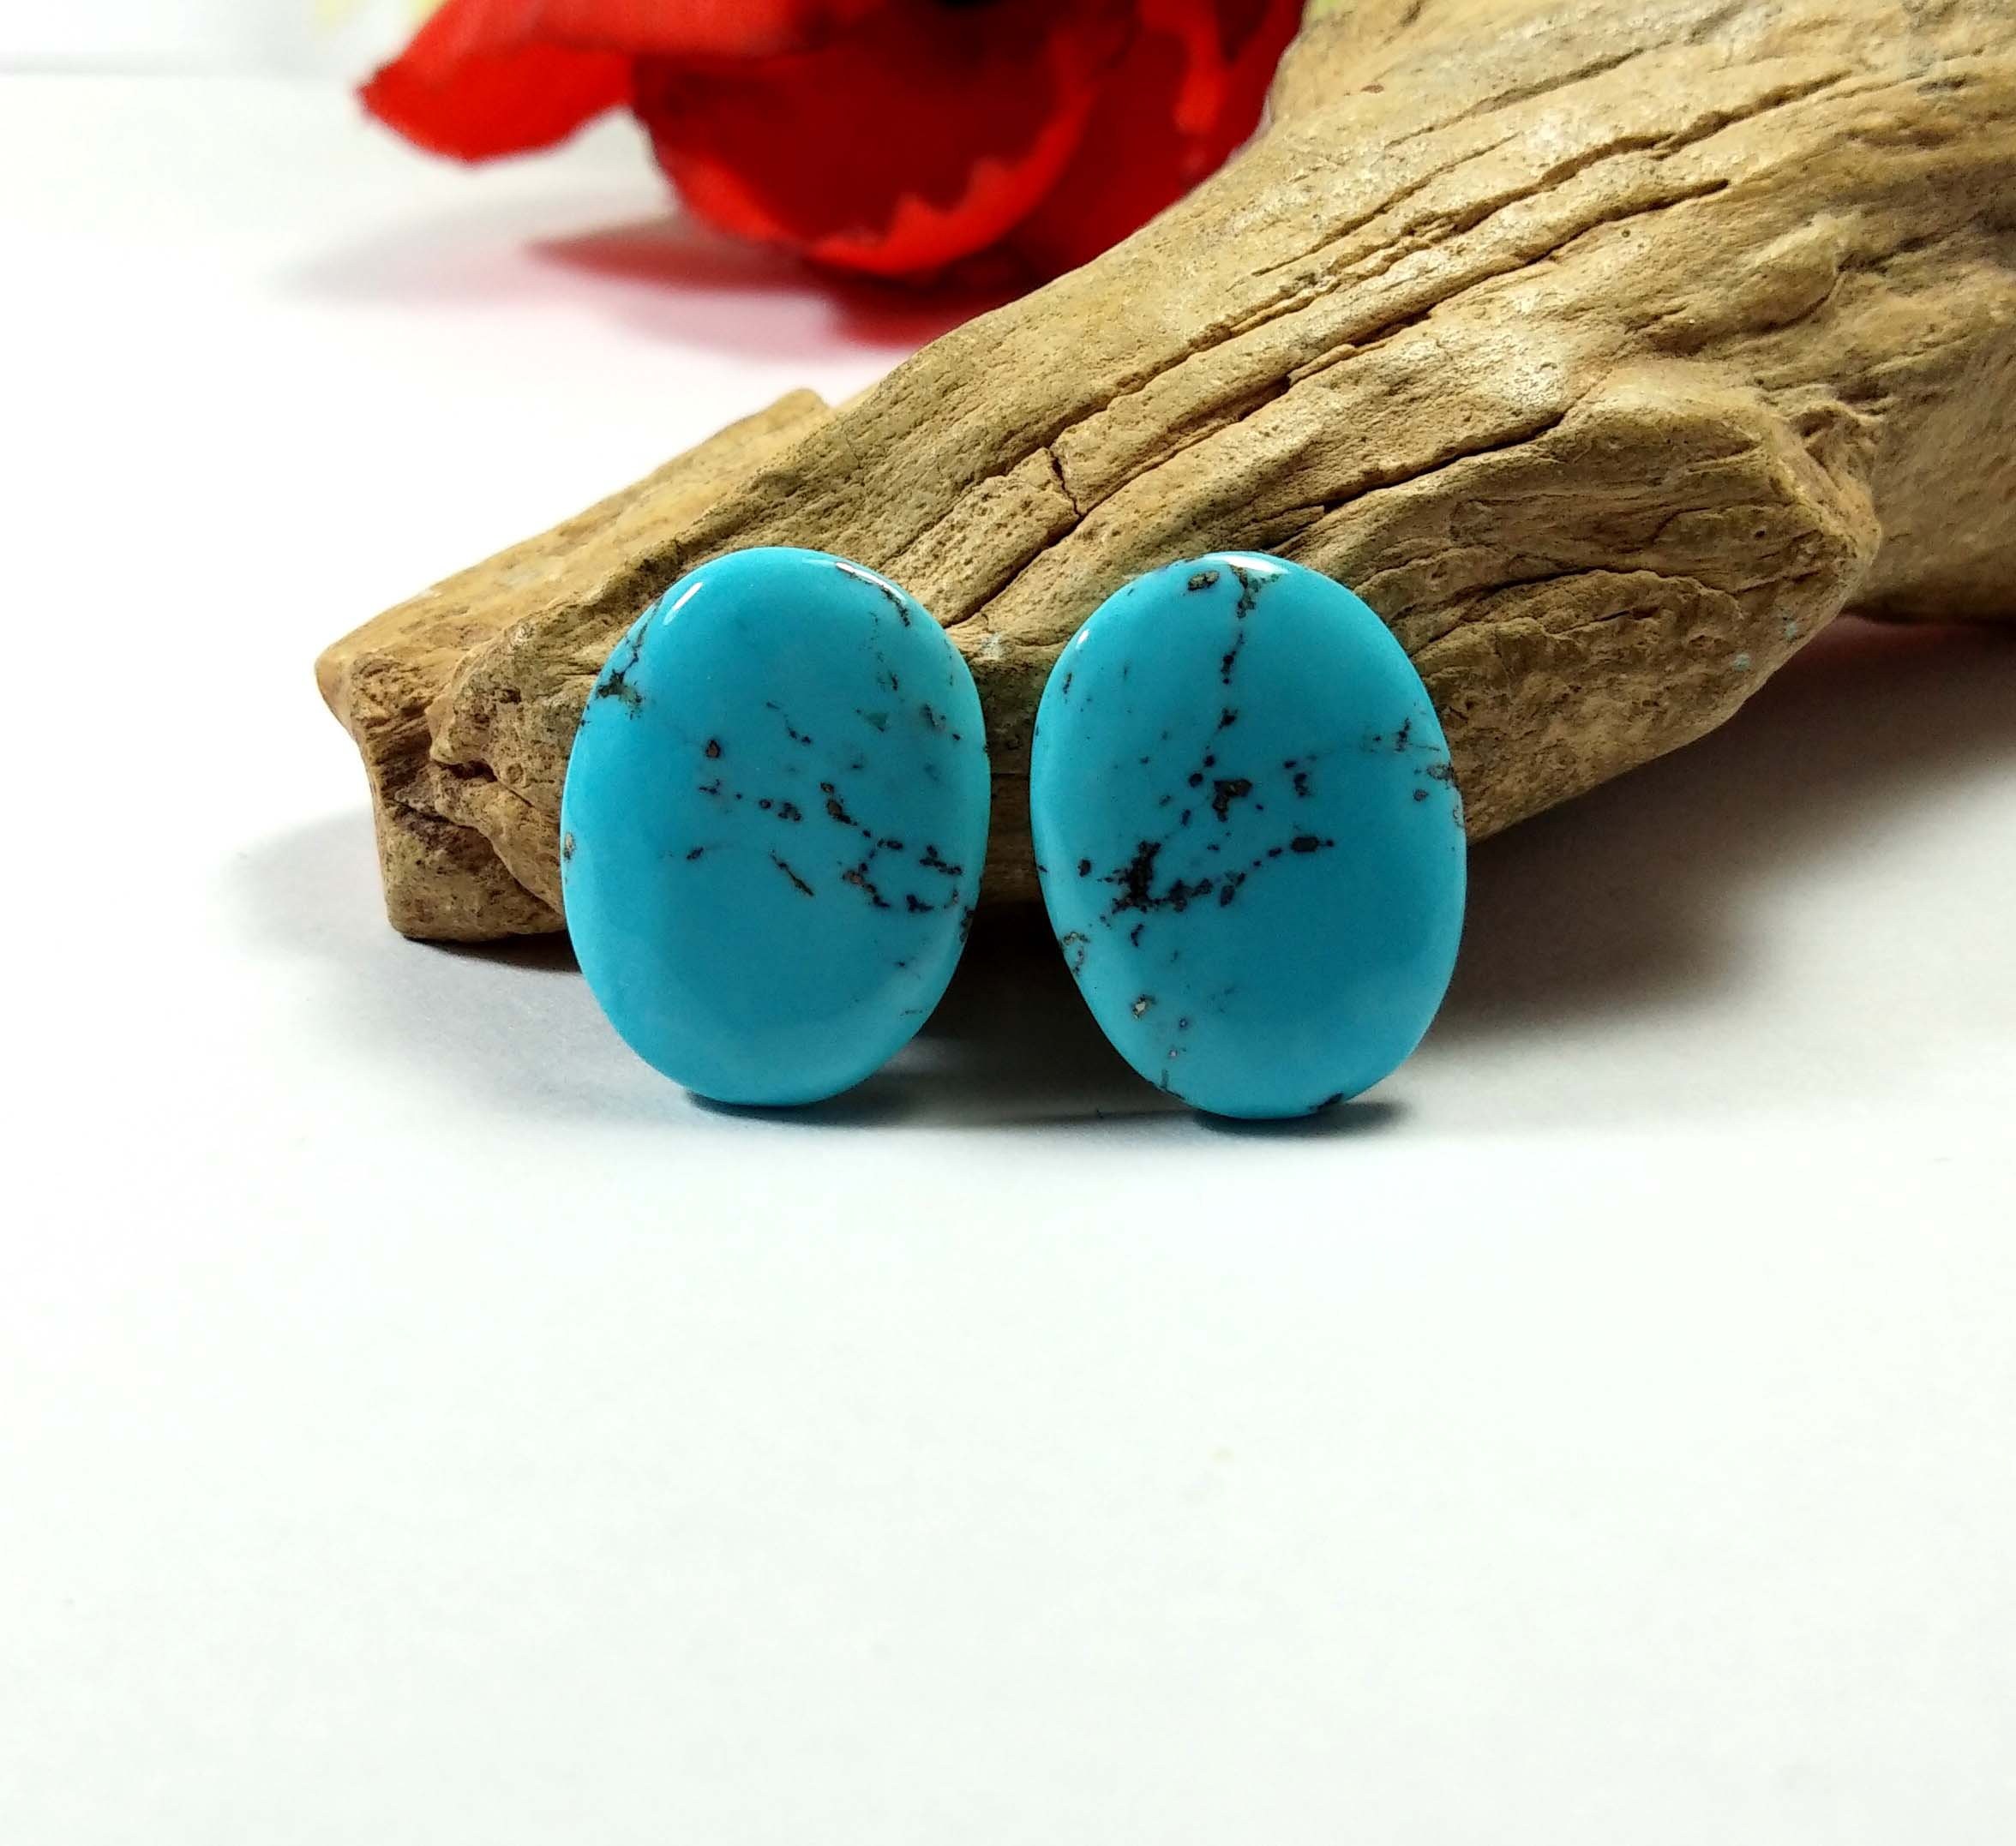 11.76 Cts Beautiful Arizona Turquoise Pair Cabochon Oval Shape Matching Pair Wire Wrapping Earring Jewelry Good Quality Arizona Turquoise